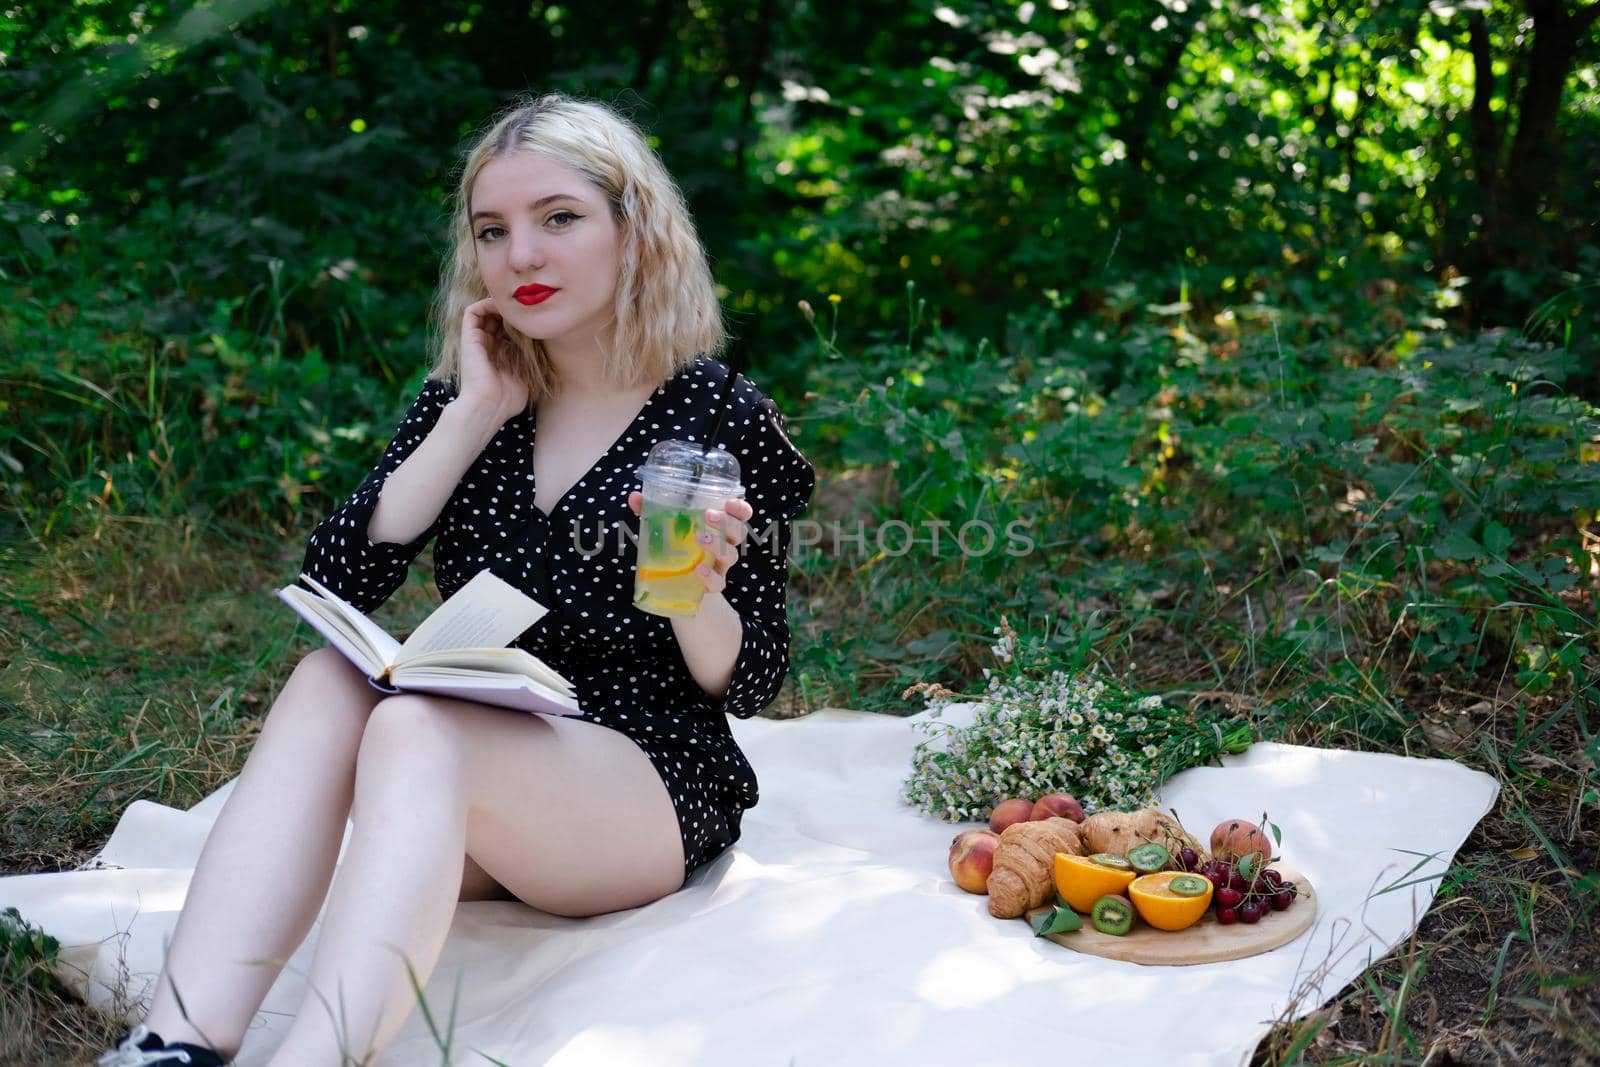 portrait of young woman on a picnic on plaid in park reading a book with tasty snacks.